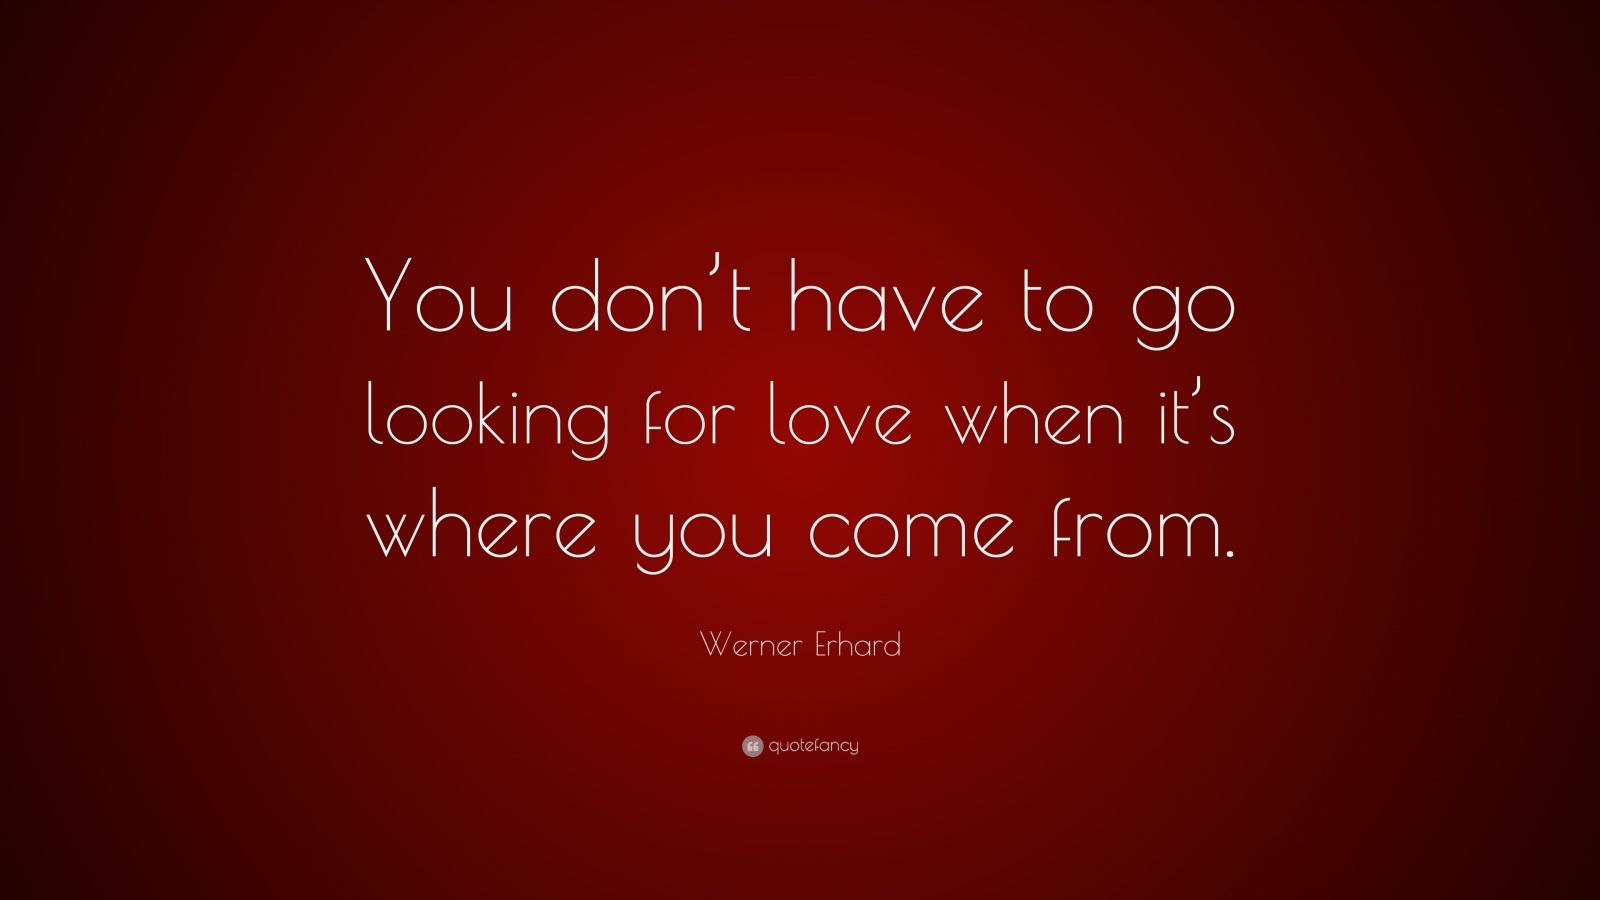 Werner Erhard Quote: "You don’t have to go looking for love when it’s ...